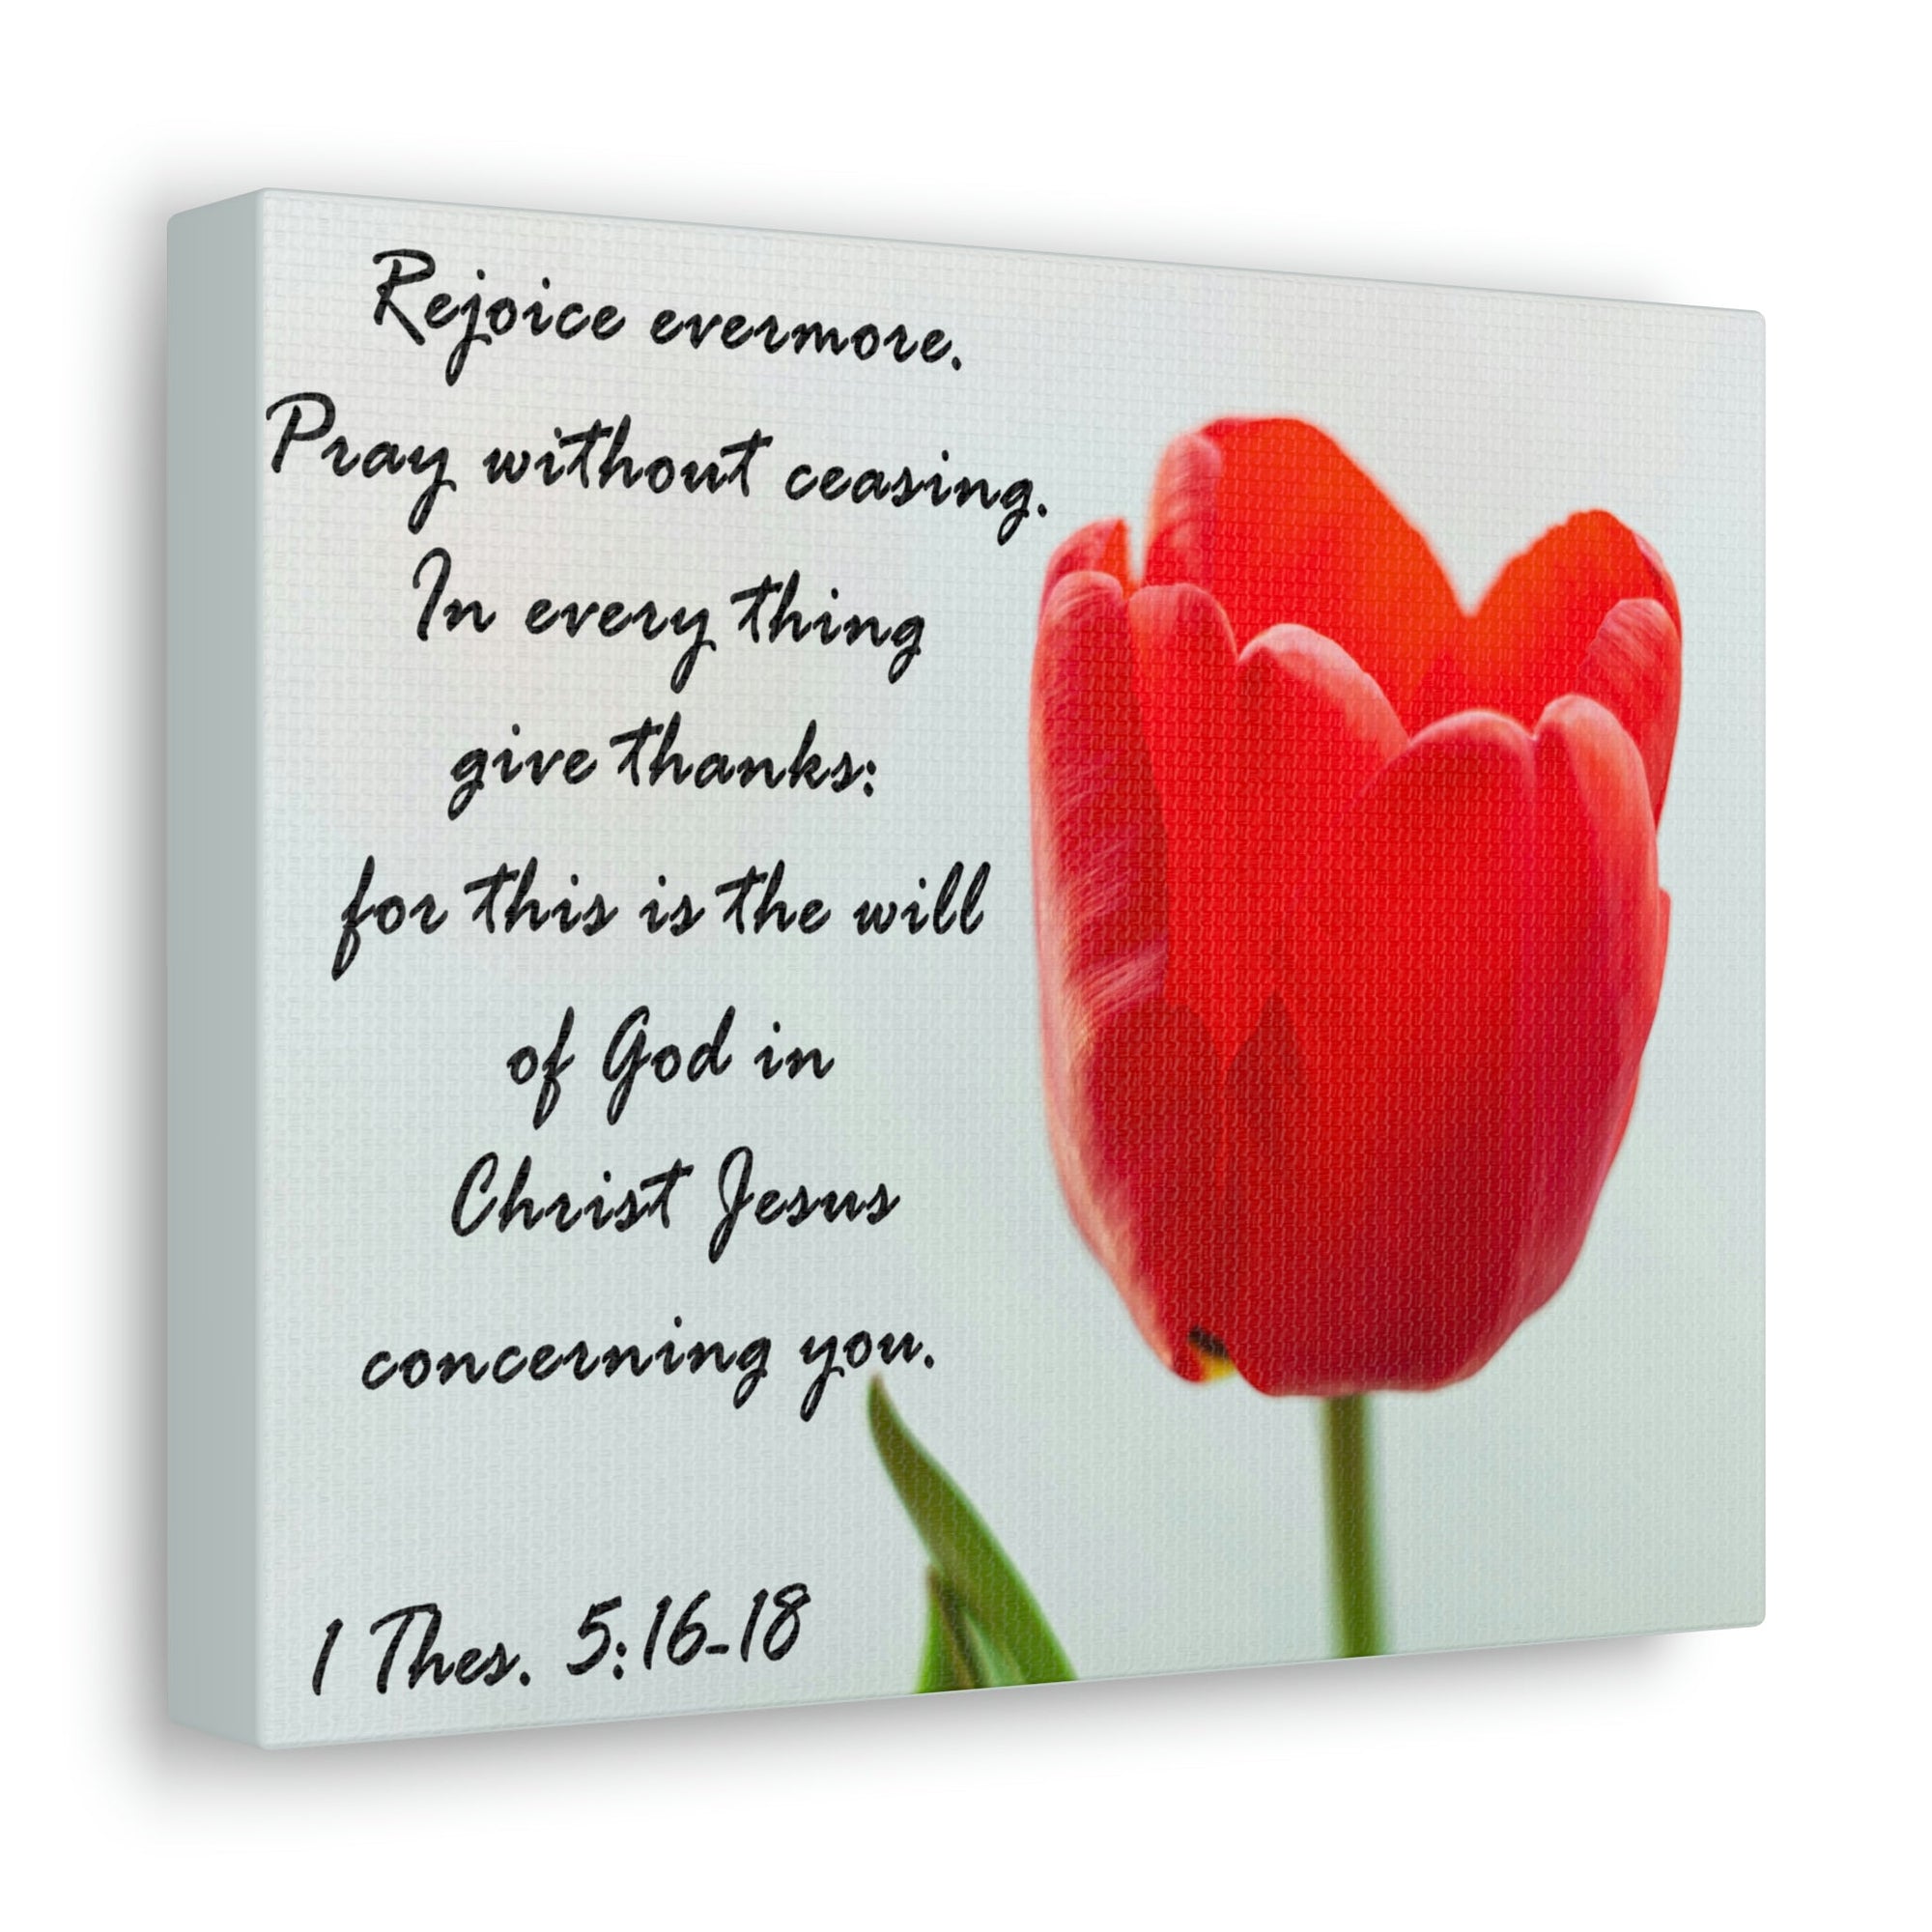 Scripture Walls Rejoice Evermore 1 Thes. 5:17 Bible Verse Canvas Christian Wall Art Ready to Hang Unframed-Express Your Love Gifts